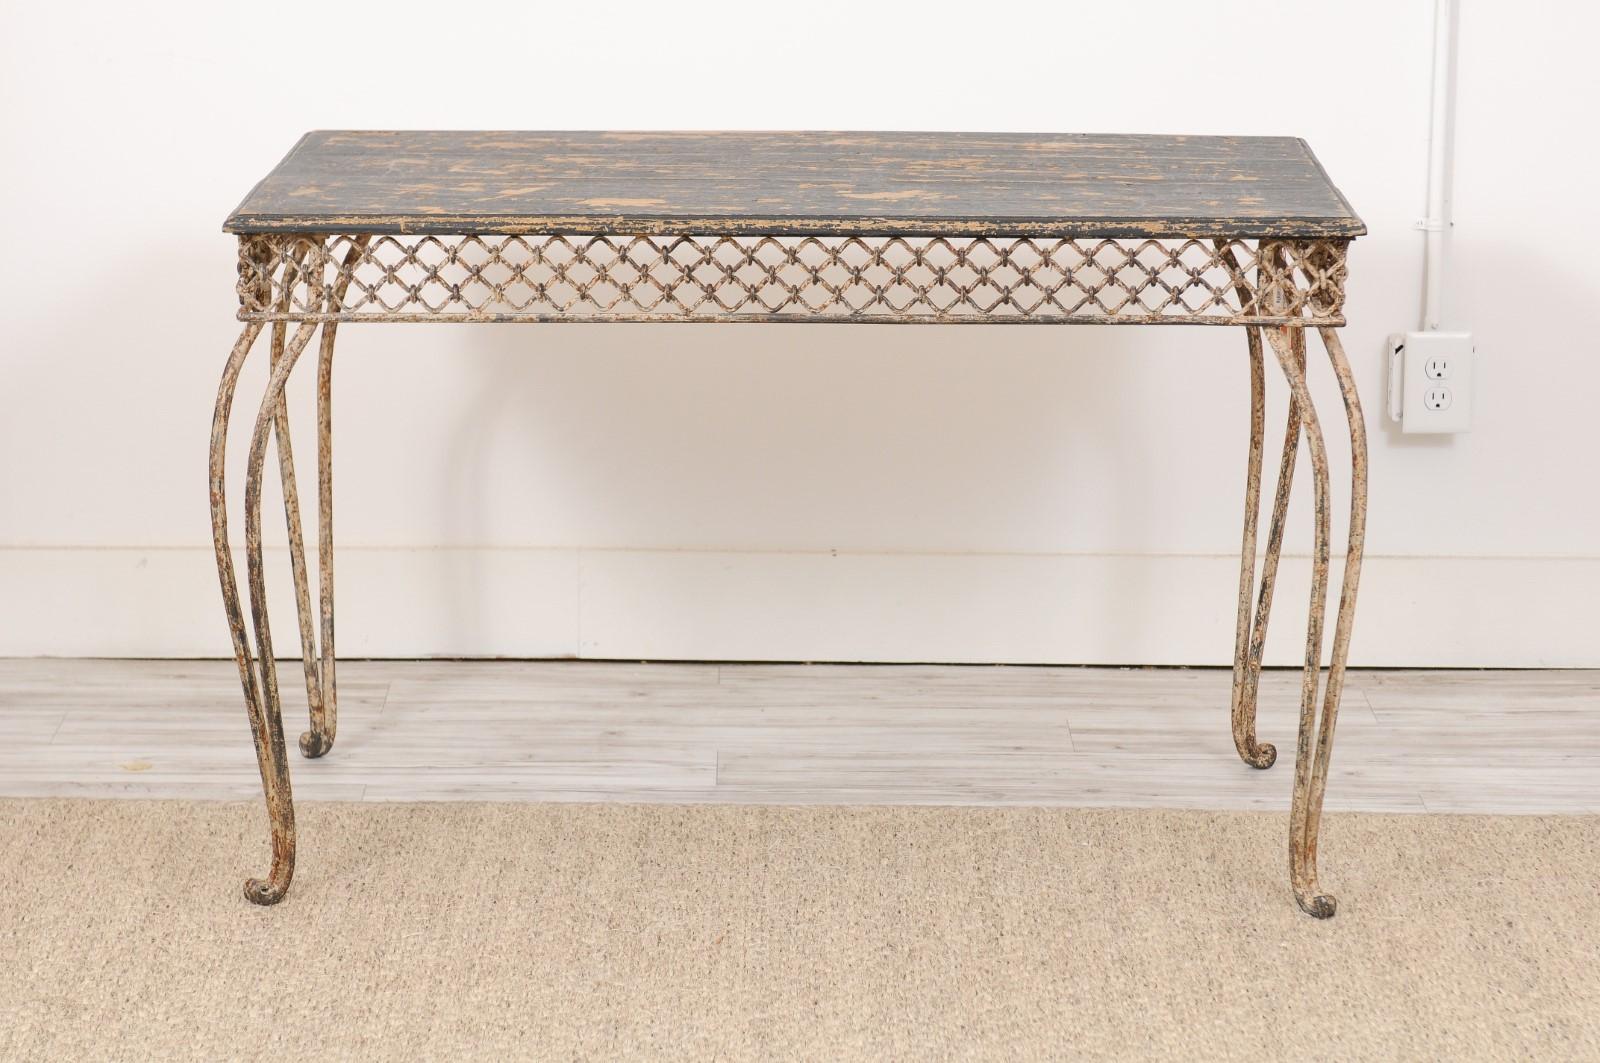 Why we love it, it's an elegant iron and wood garden table with intricate detailing, a pretty patina and superb crunch.